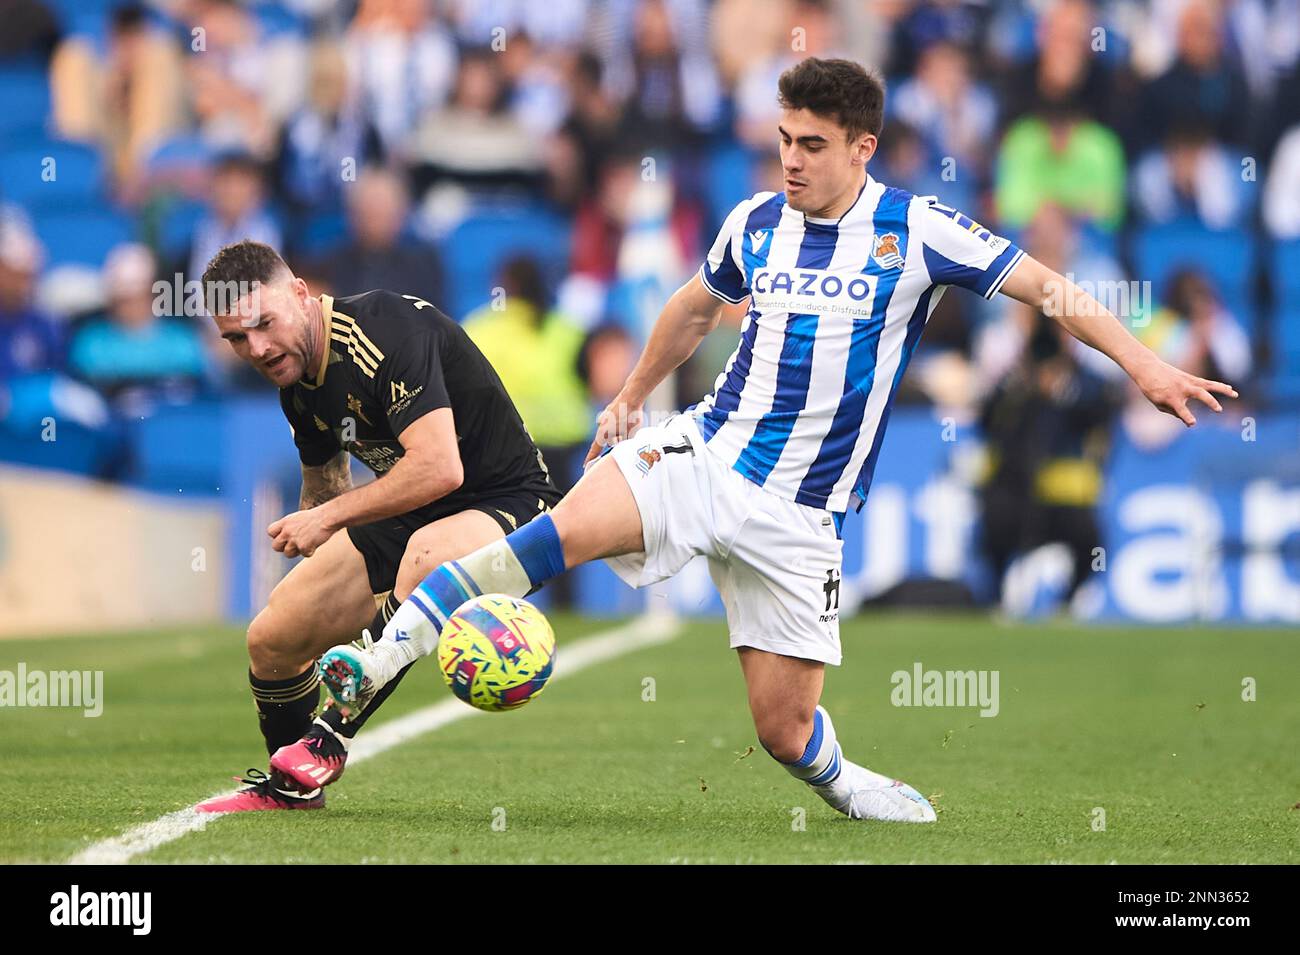 Ander Barrenetxea of Real Sociedad and Javi Galan of RC Celta in action during the La Liga Santander match between Real Sociedad and RC Celta CF at Re Stock Photo